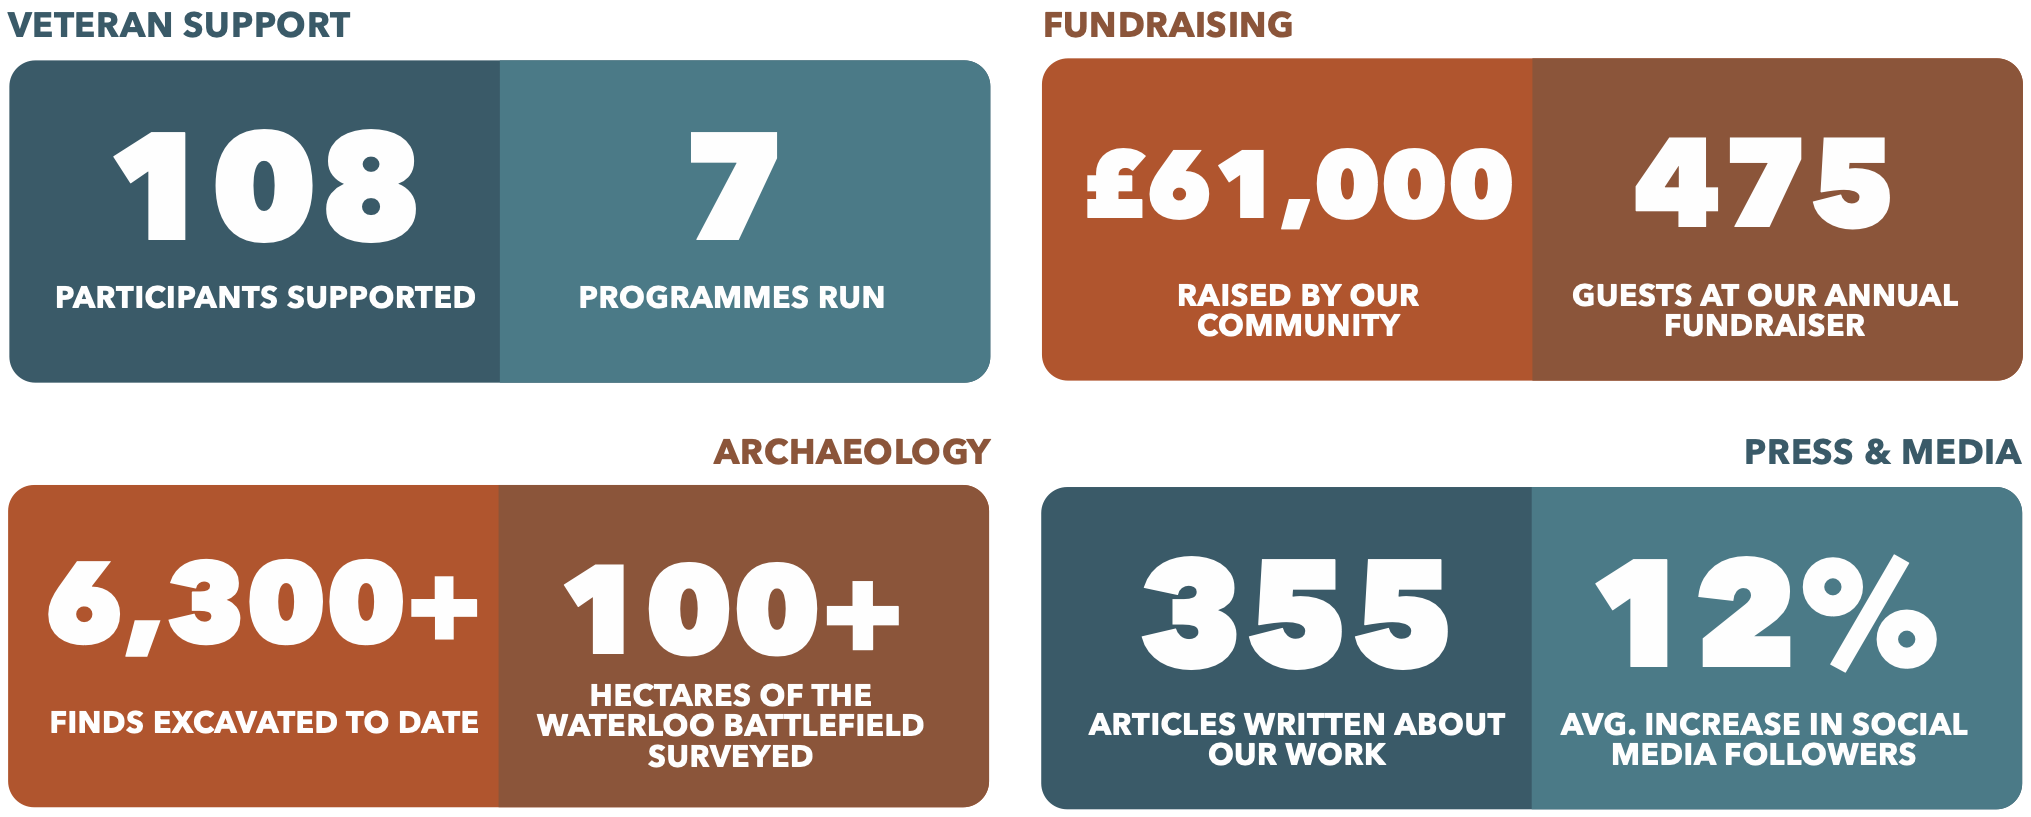 Veteran Support. 108 participants supported. 7 programmes run. Fundraising. £61,000 raised by out community. 475 guests at our annual fundraiser. Archaeology. Over 6,300 finds excavated to date. Over 100 hectares of the Waterloo battlefield surveyed. Press and media. 355 articles written about our work. 12% average increase in social media followers.